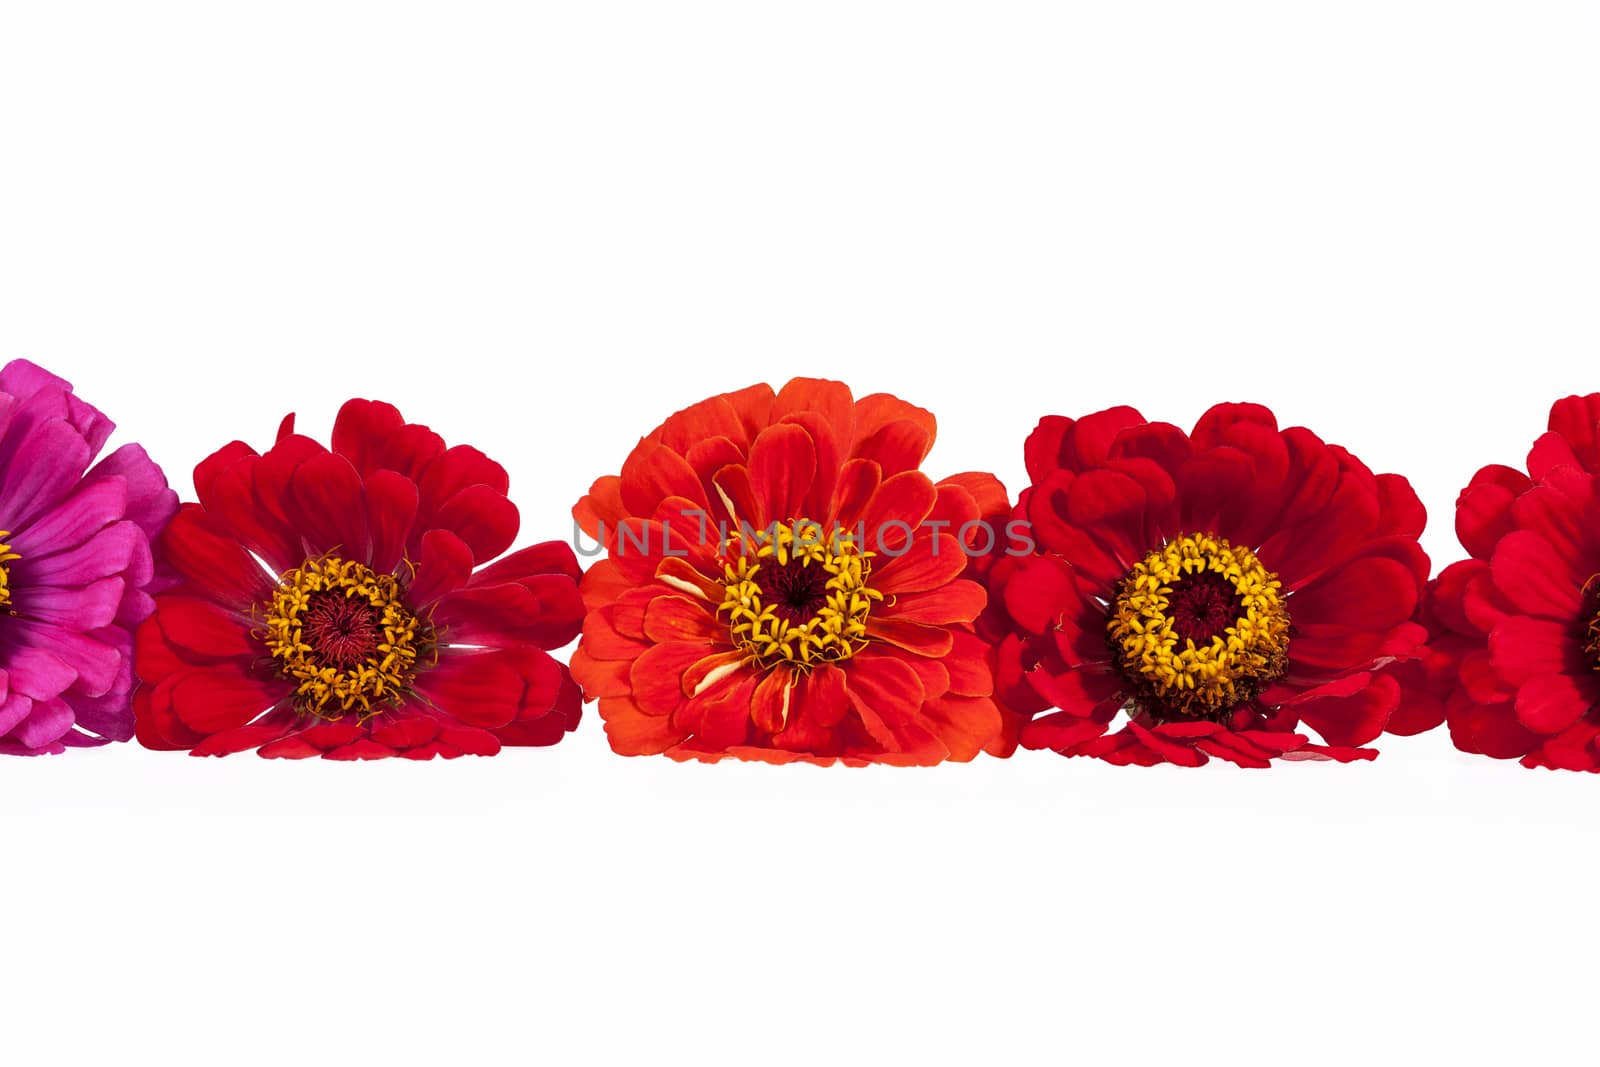 Flowers of red zinnia isolated on white background by mychadre77